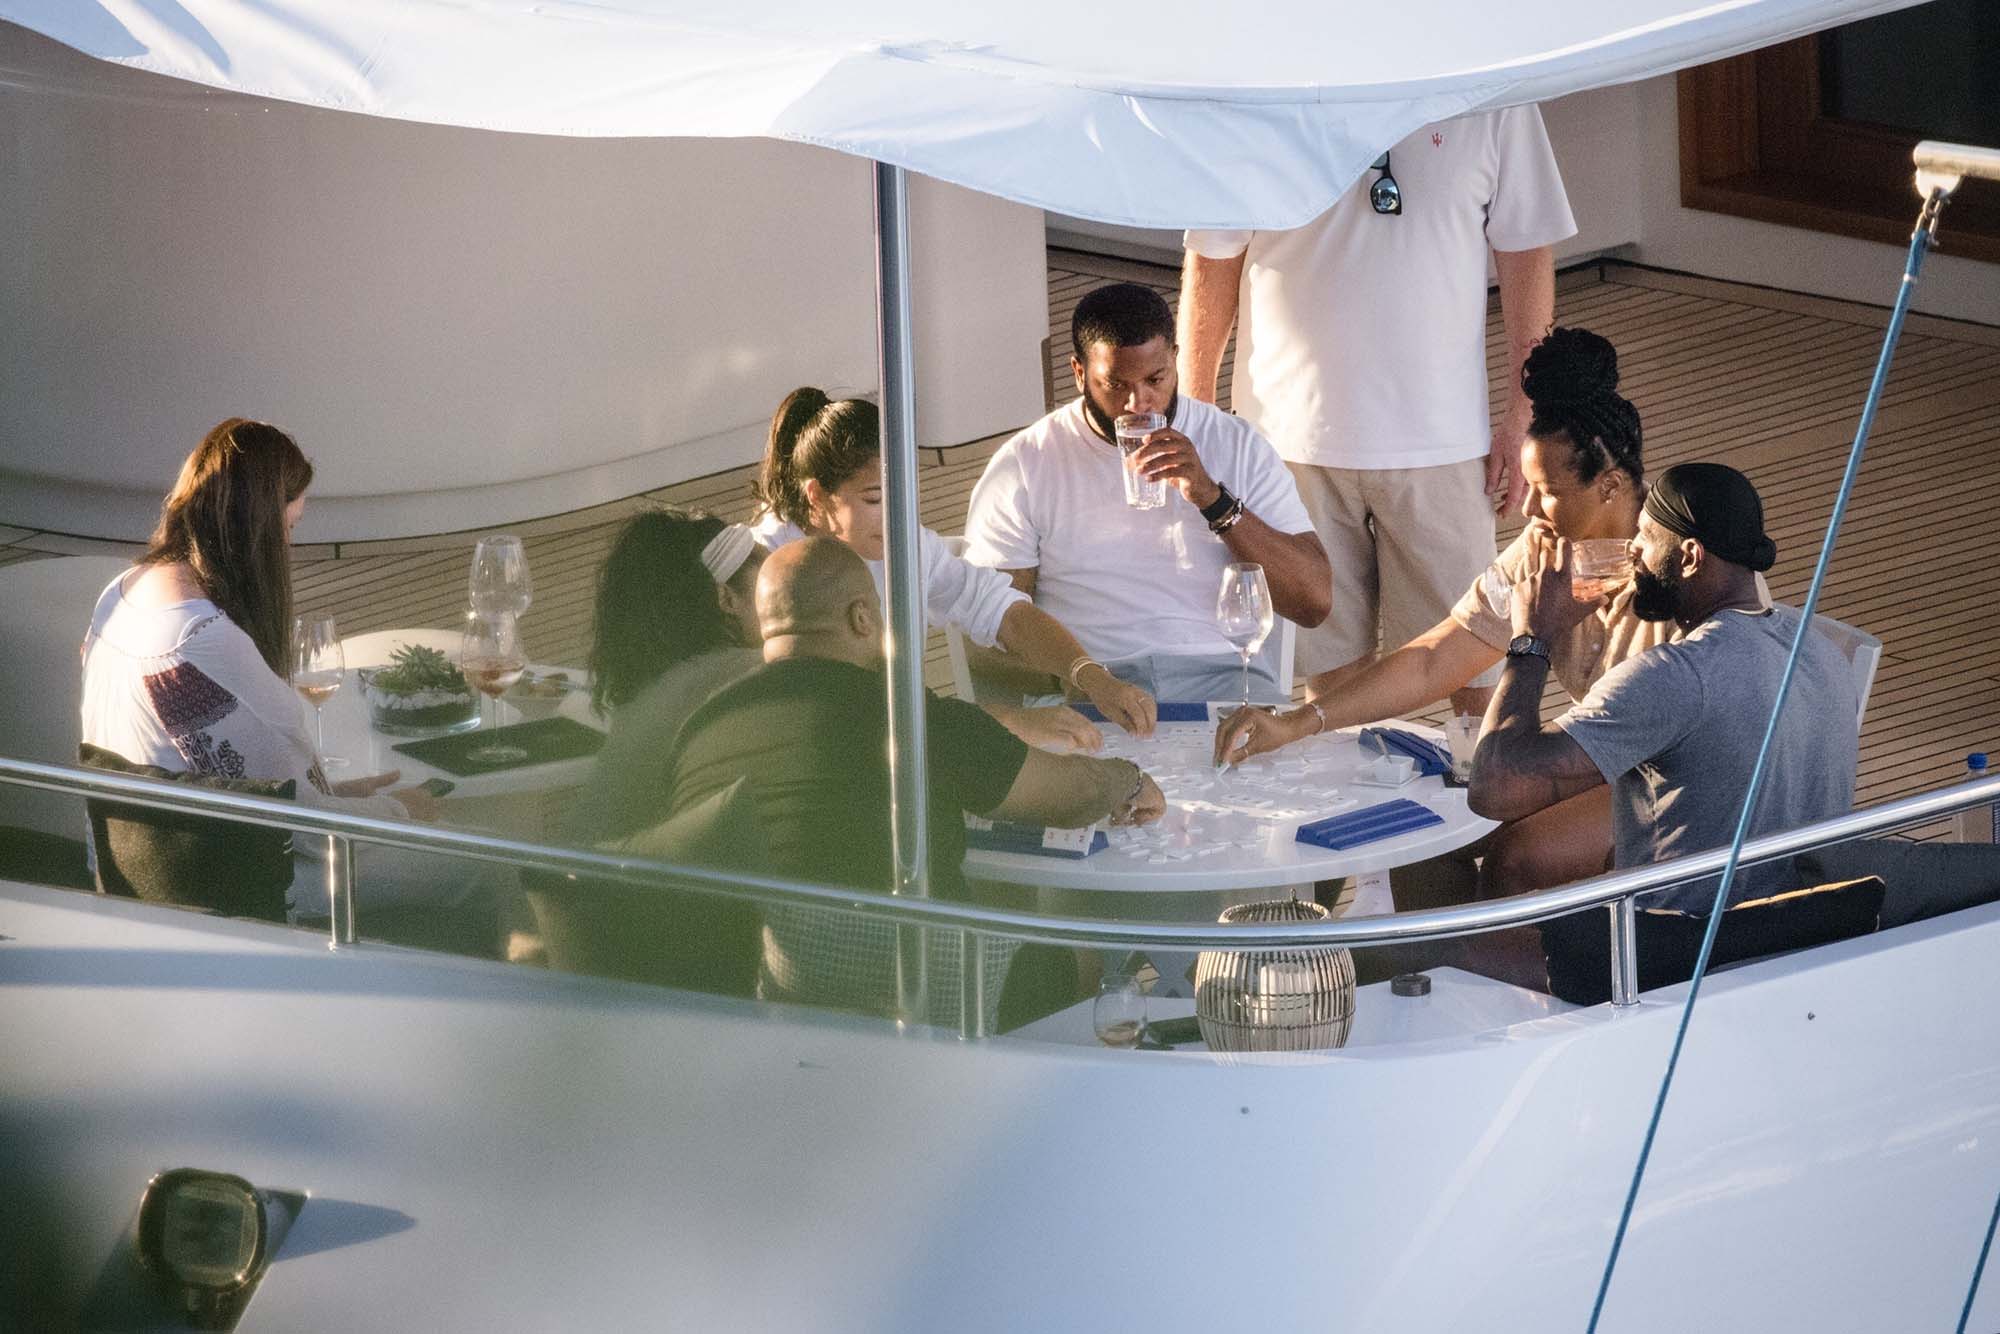 LeBron James plays UNO with friends on a yacht.